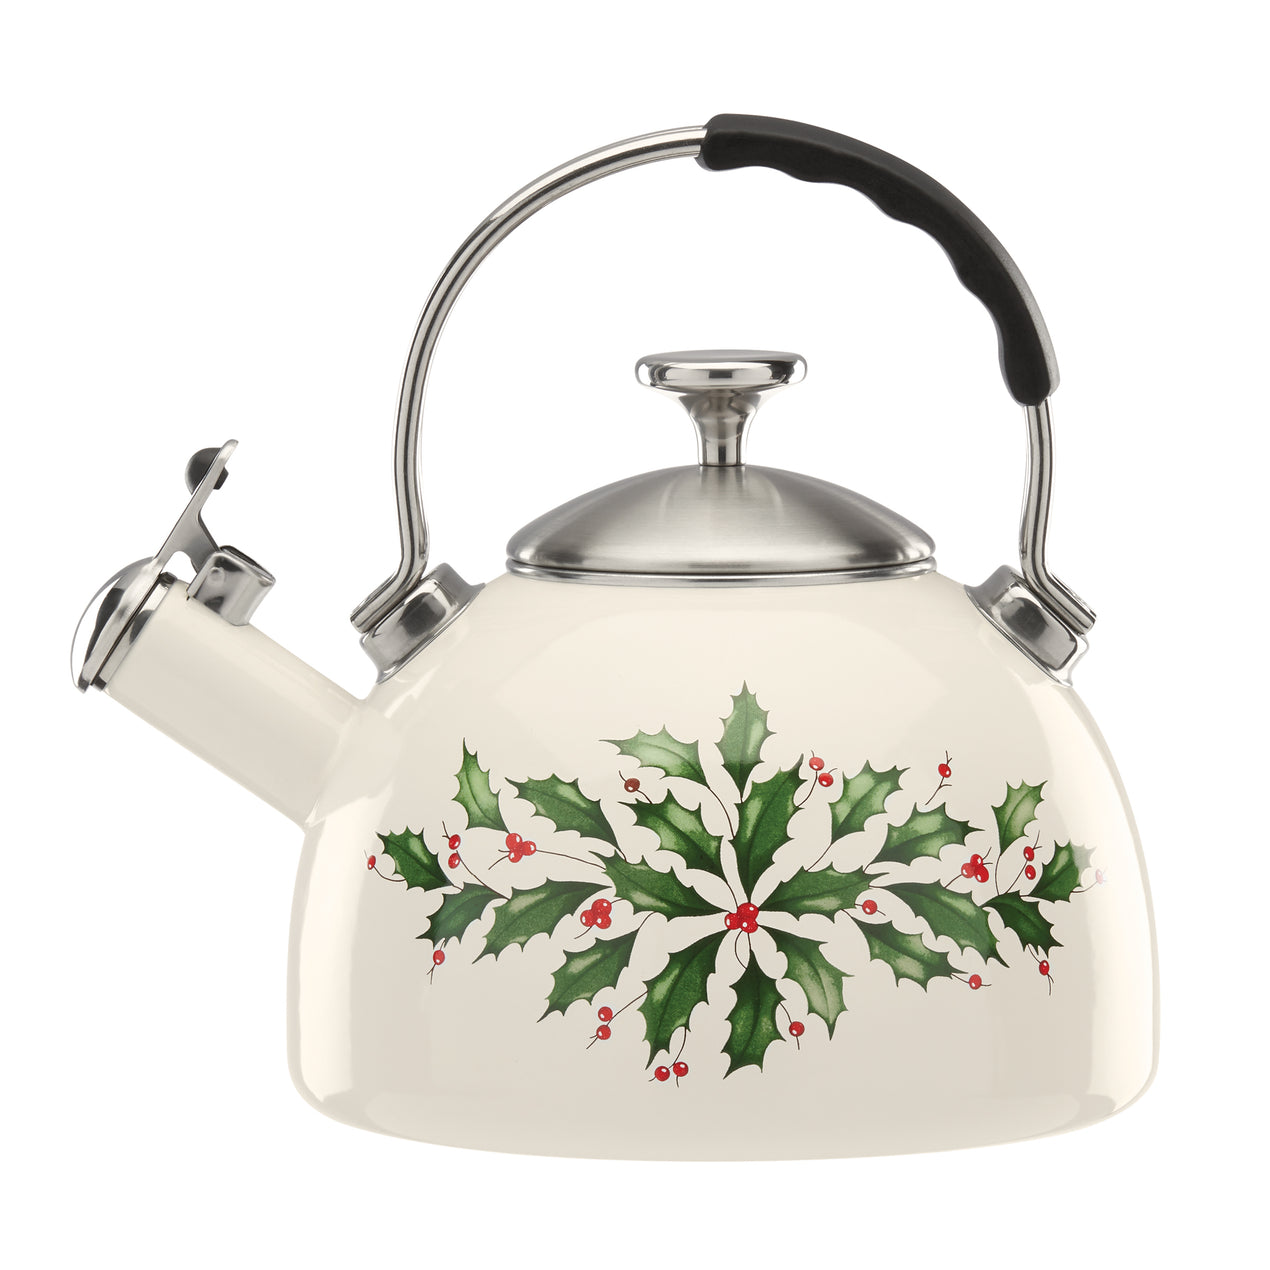 Stainless Steel Tea Kettle (Variety Sizes) - Holy Land Grocery